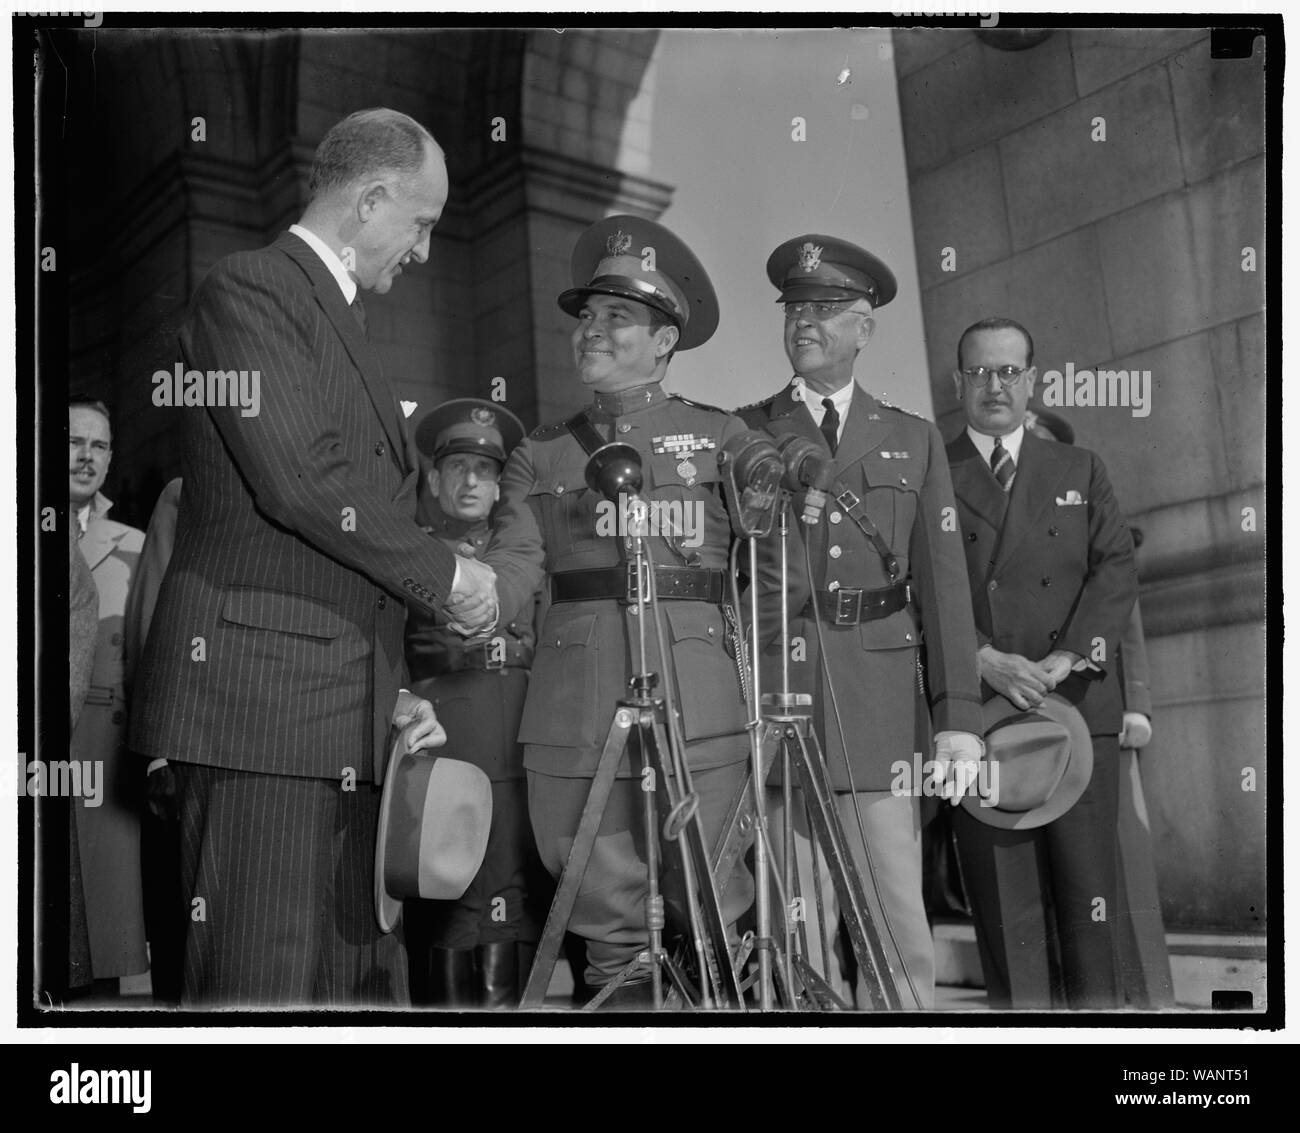 Cuba's Dictator greeted upon arrival. Washington, D.C., Nov. 10. Sumner Wells, The Undersecretary of State, shown shaking hands with Col. Fulgencio Batista as Gen. Malin Craig, the Chief of Staff of the U.S. Army looks on, 11/10/38 Stock Photo